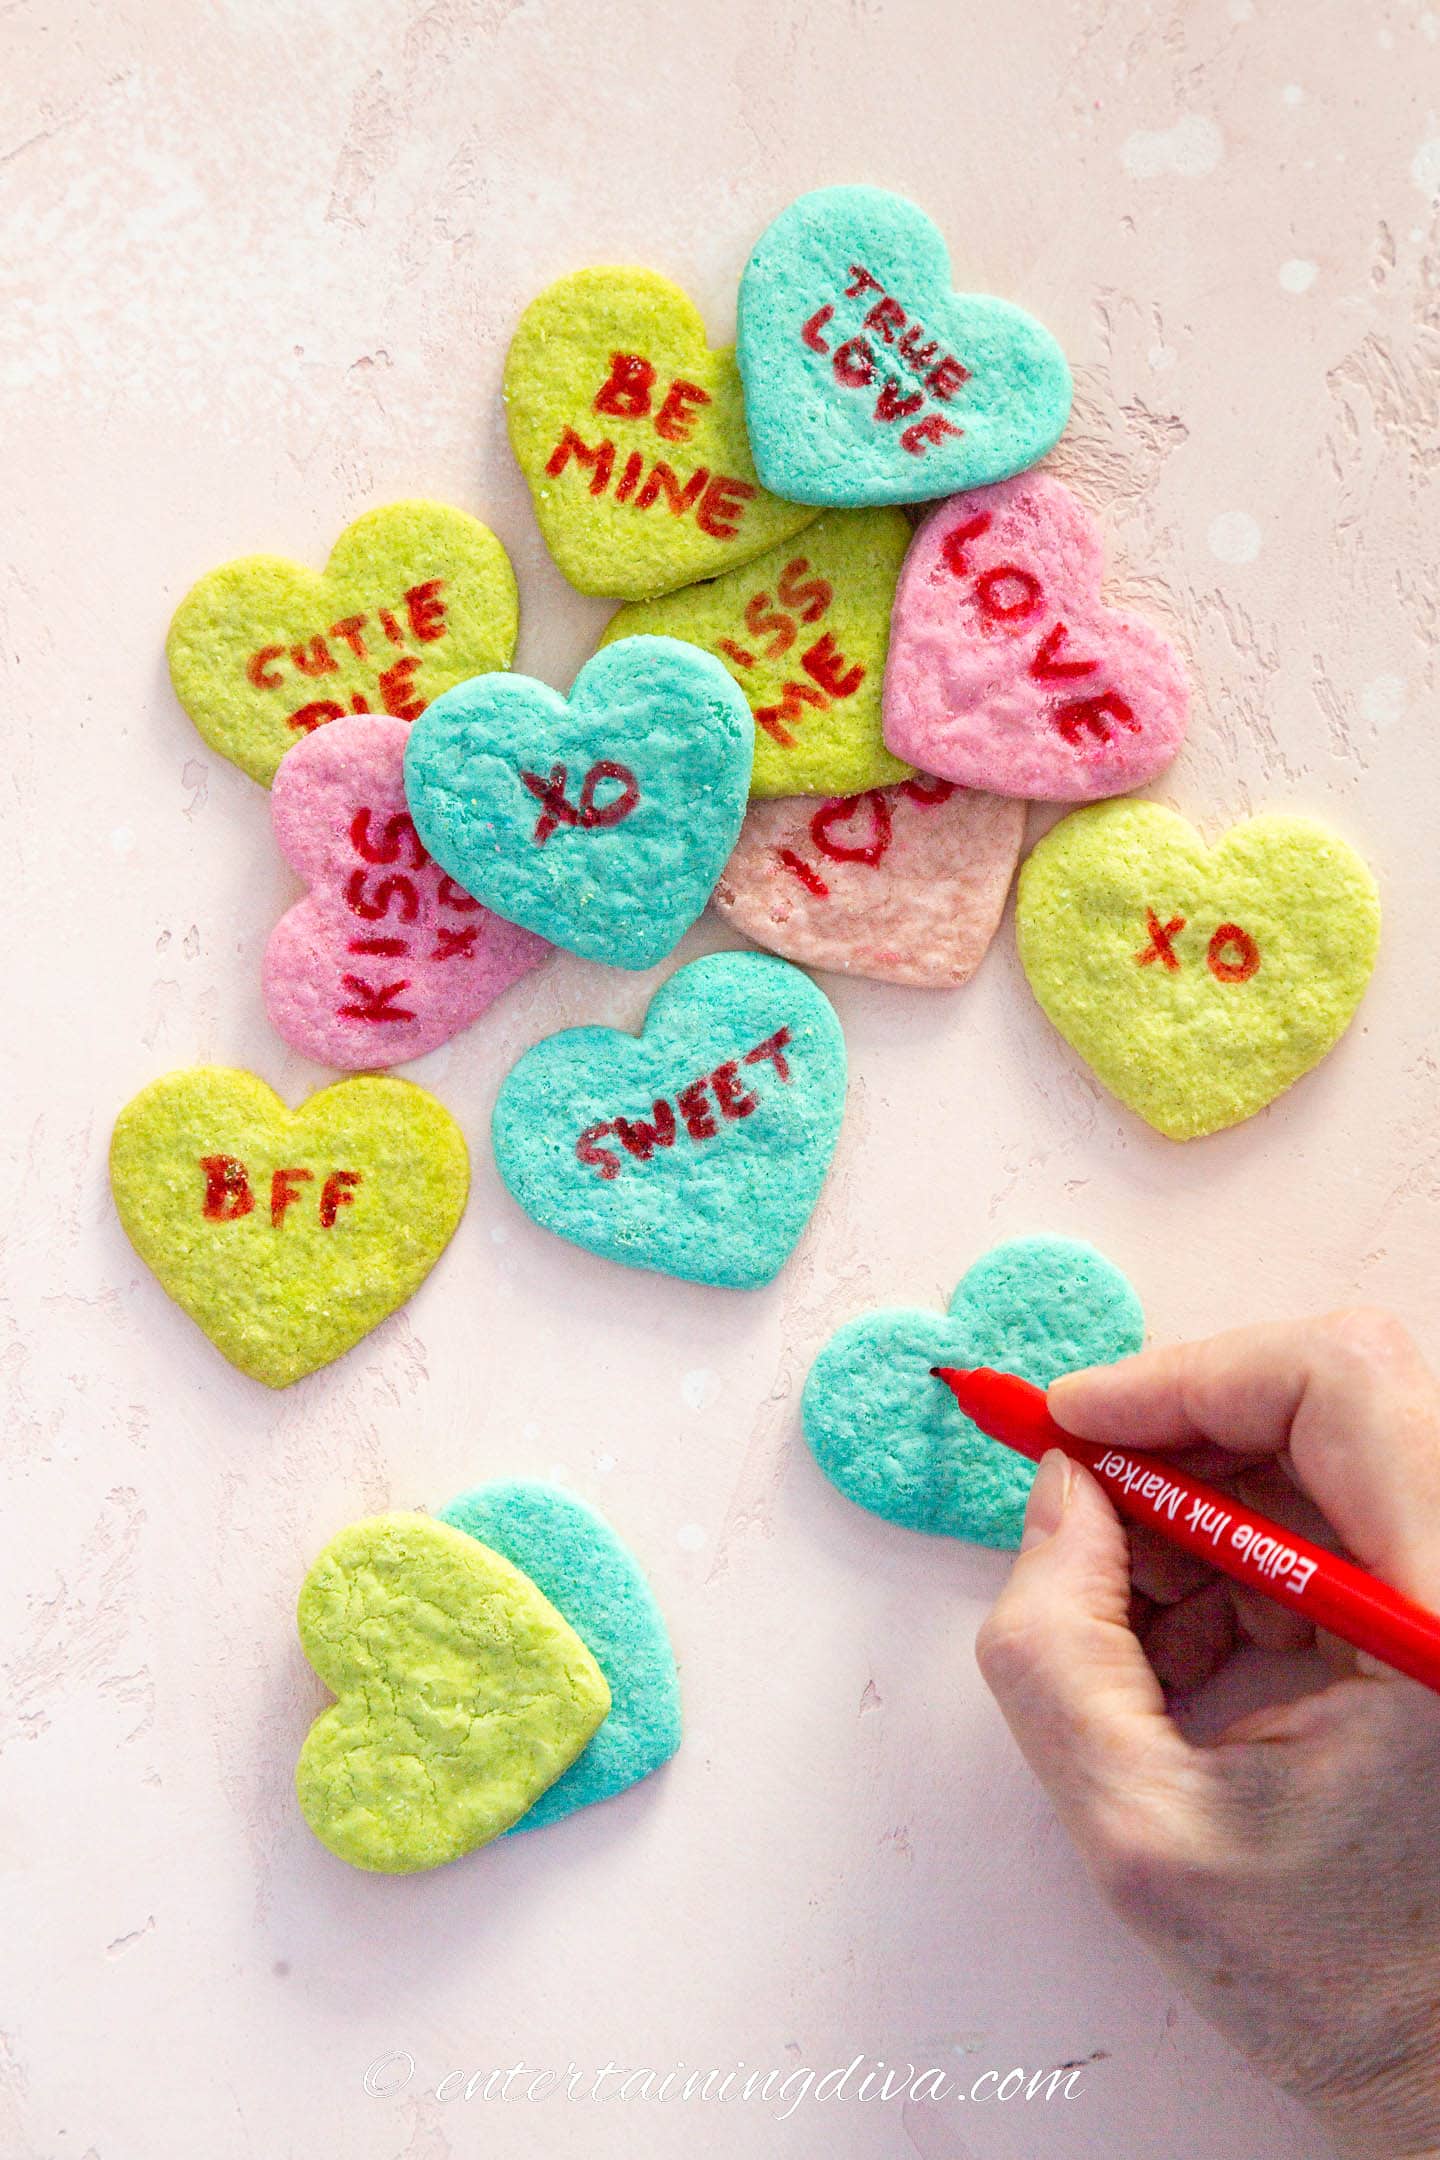 conversation heart cookies with sayings written in edible ink